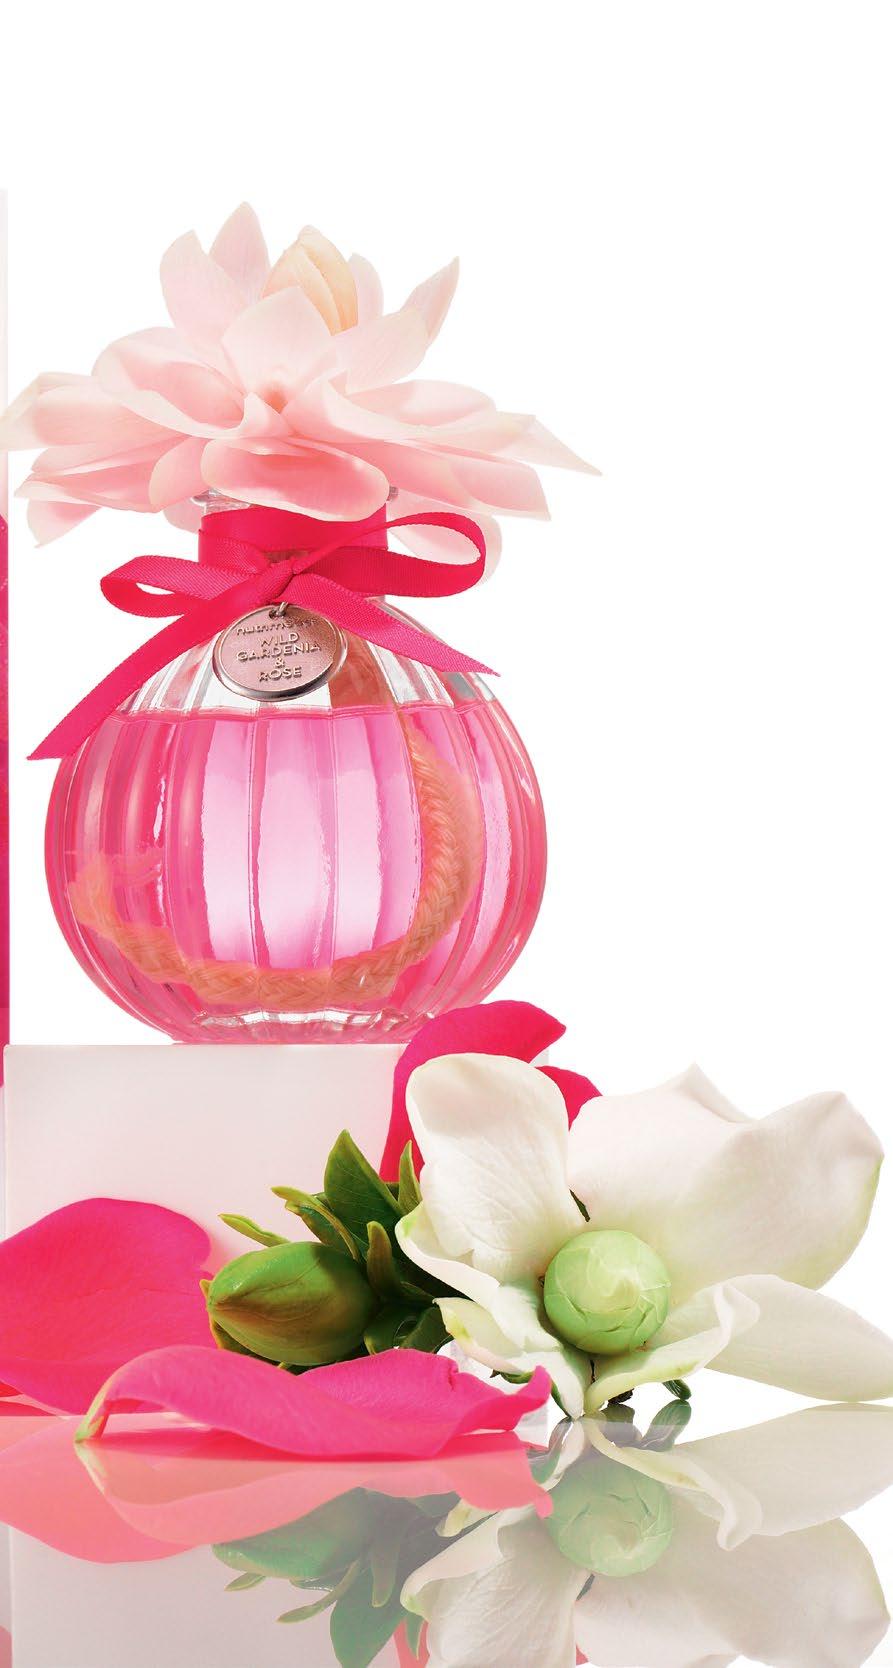 HOME MUST-HAVE ROOM IN FULL BLOOM The perfect gift for every home Nothing awakens your mood or brightens up your home like our charming NEW Wild Gardenia & Rose Fragrance Diffuser with the fresh